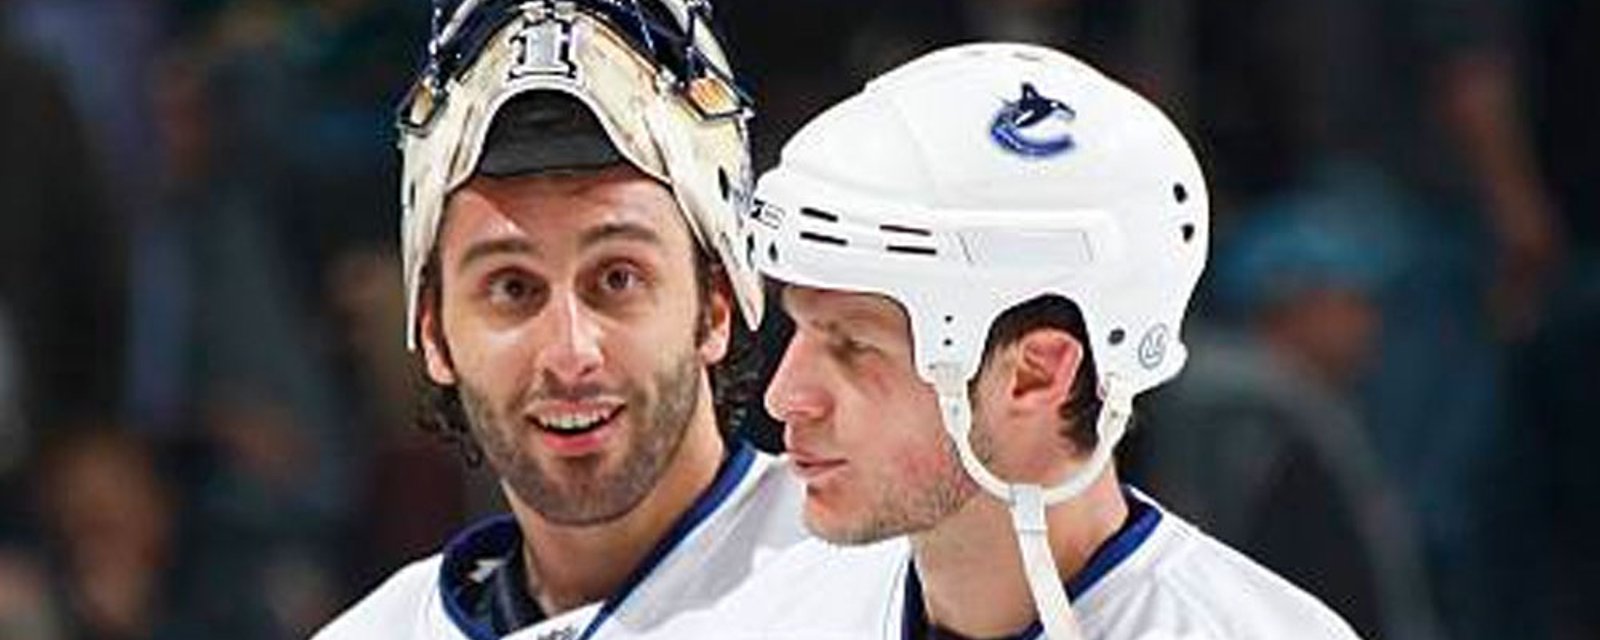 Luongo buries himself and Bieksa after Canucks contract announcement